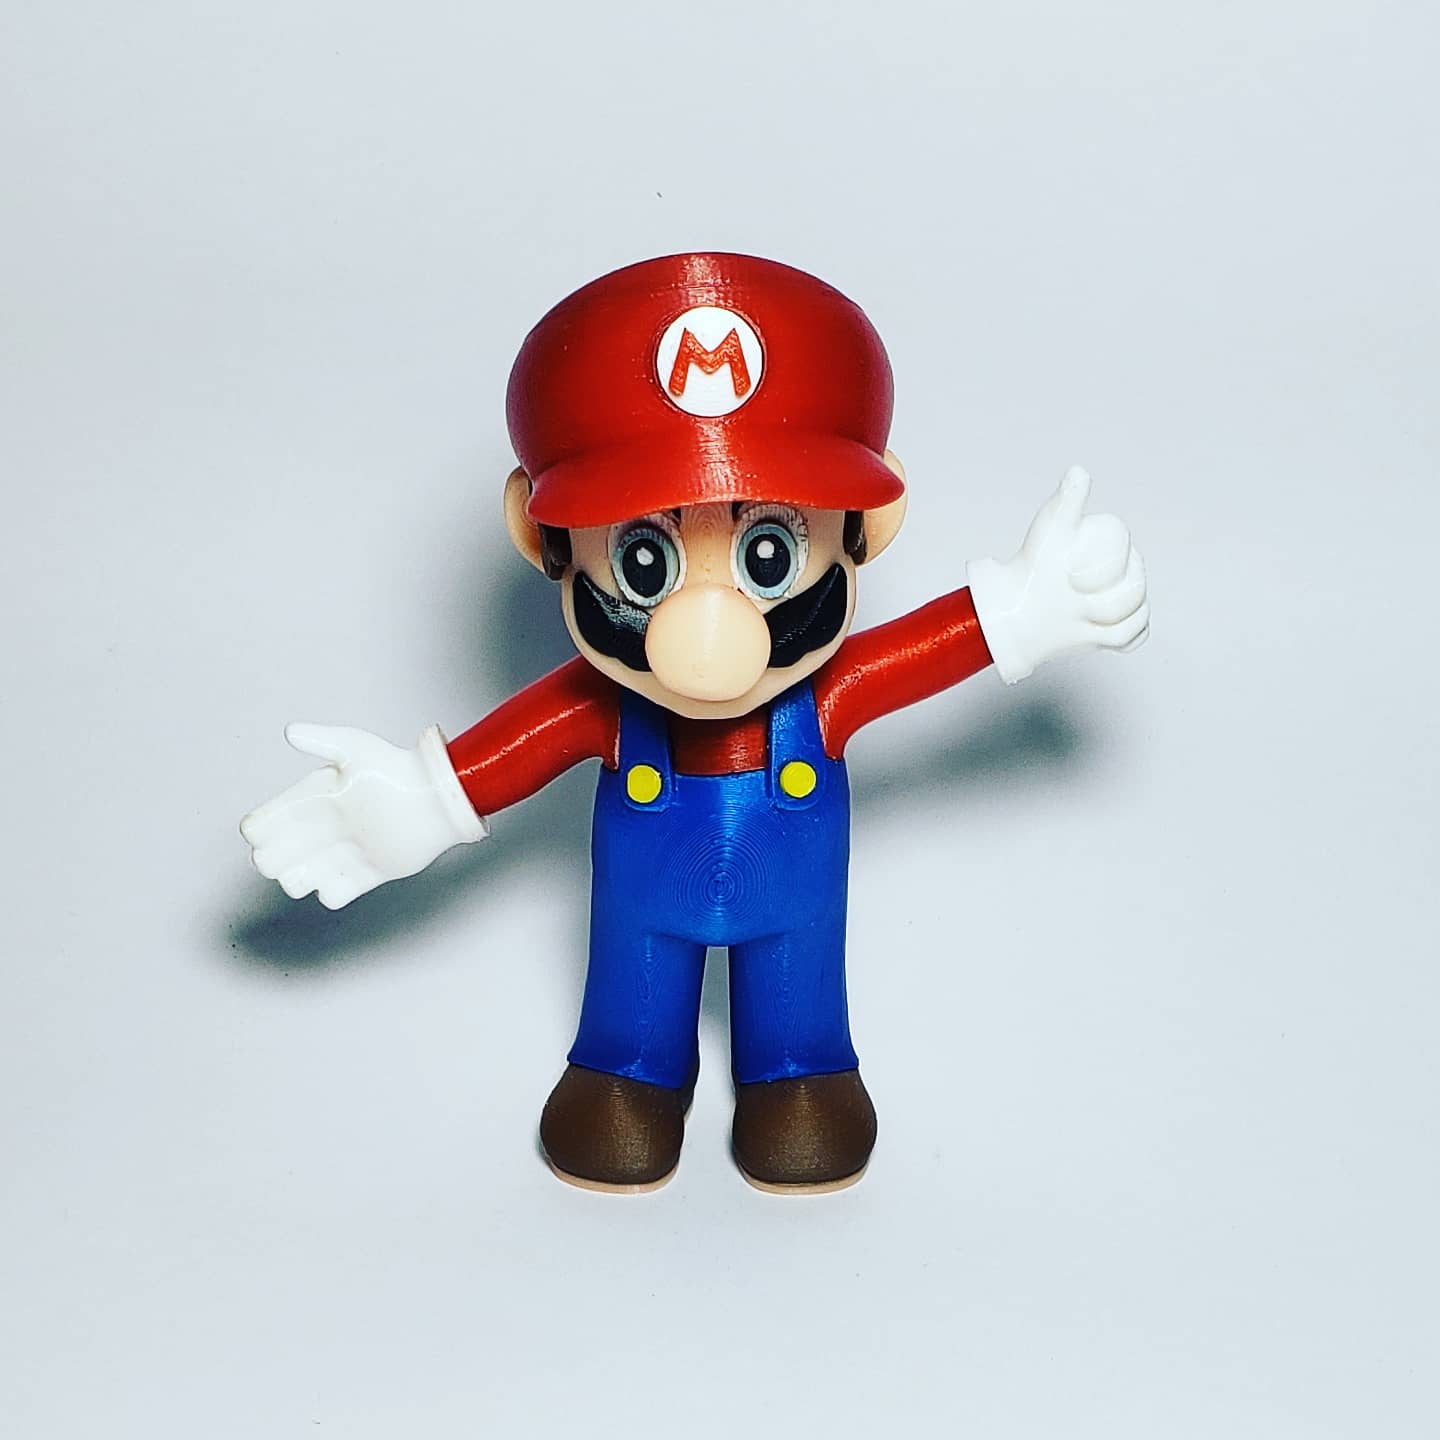 3D Printable Mario from Mario games - Multi-color by Bruno Pitanga Maia